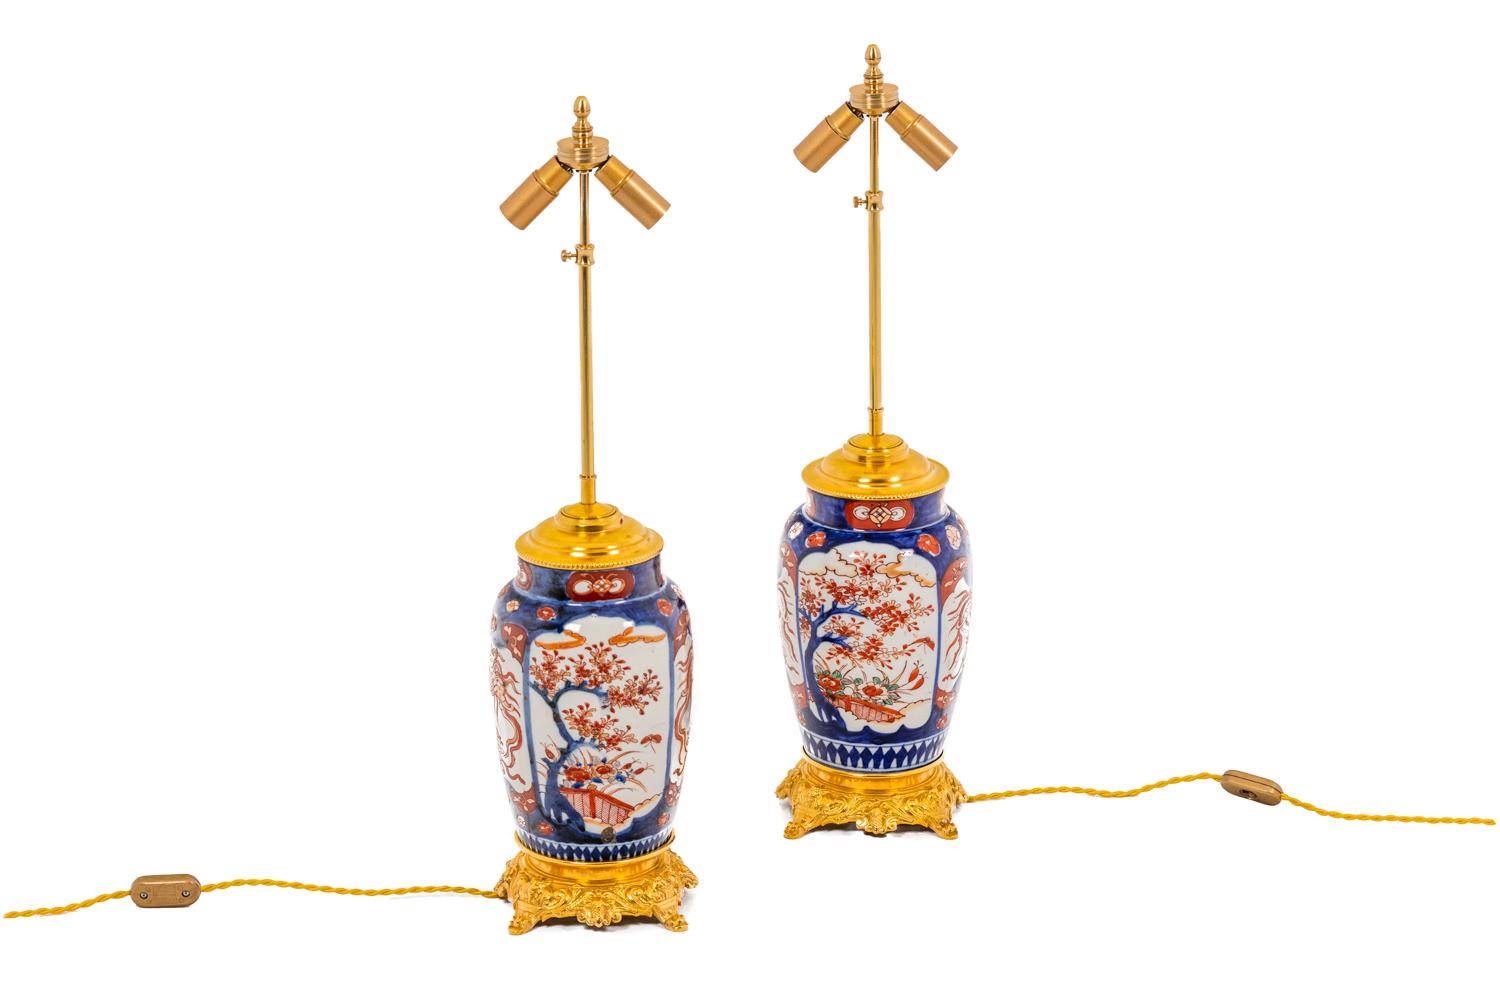 Pair of egg-shaped lamp with red, blue and white Imari decor topped by a neck presenting a decor of branches of cherry tree and blue and red phoenix in white-backgrounded reserves. The porcelain is sealed by a lid and a base in gilt bronze adorned